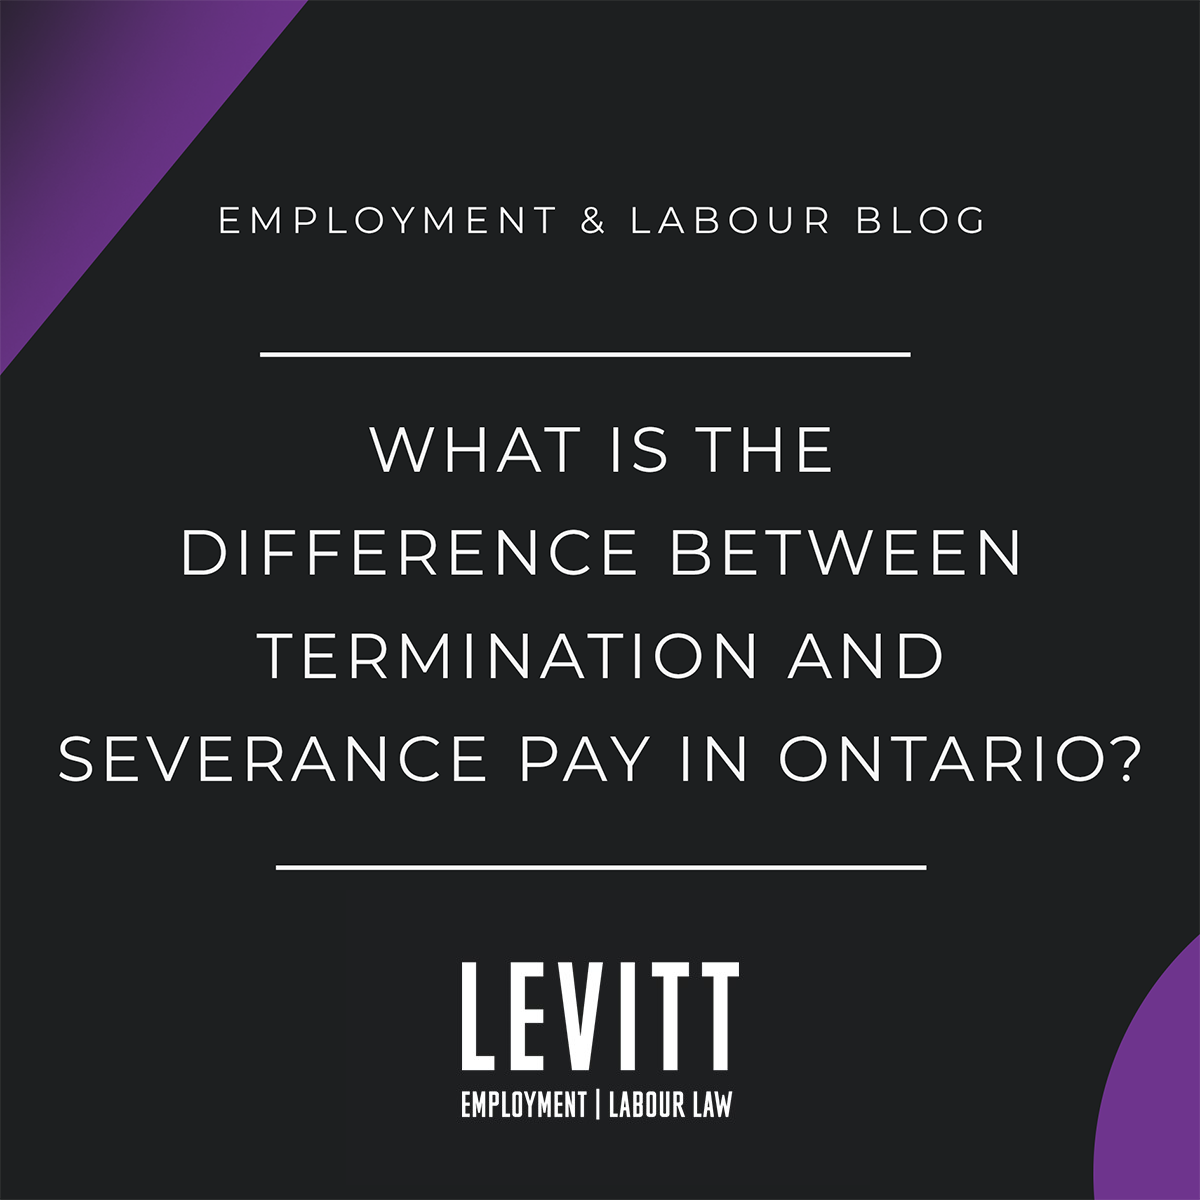 https://www.levittllp.com/wp-content/uploads/2022/09/WHAT-IS-THE-DIFFERENCE-BETWEEN-TERMINATION-AND-SEVERANCE-PAY-IN-ONTARIO.png